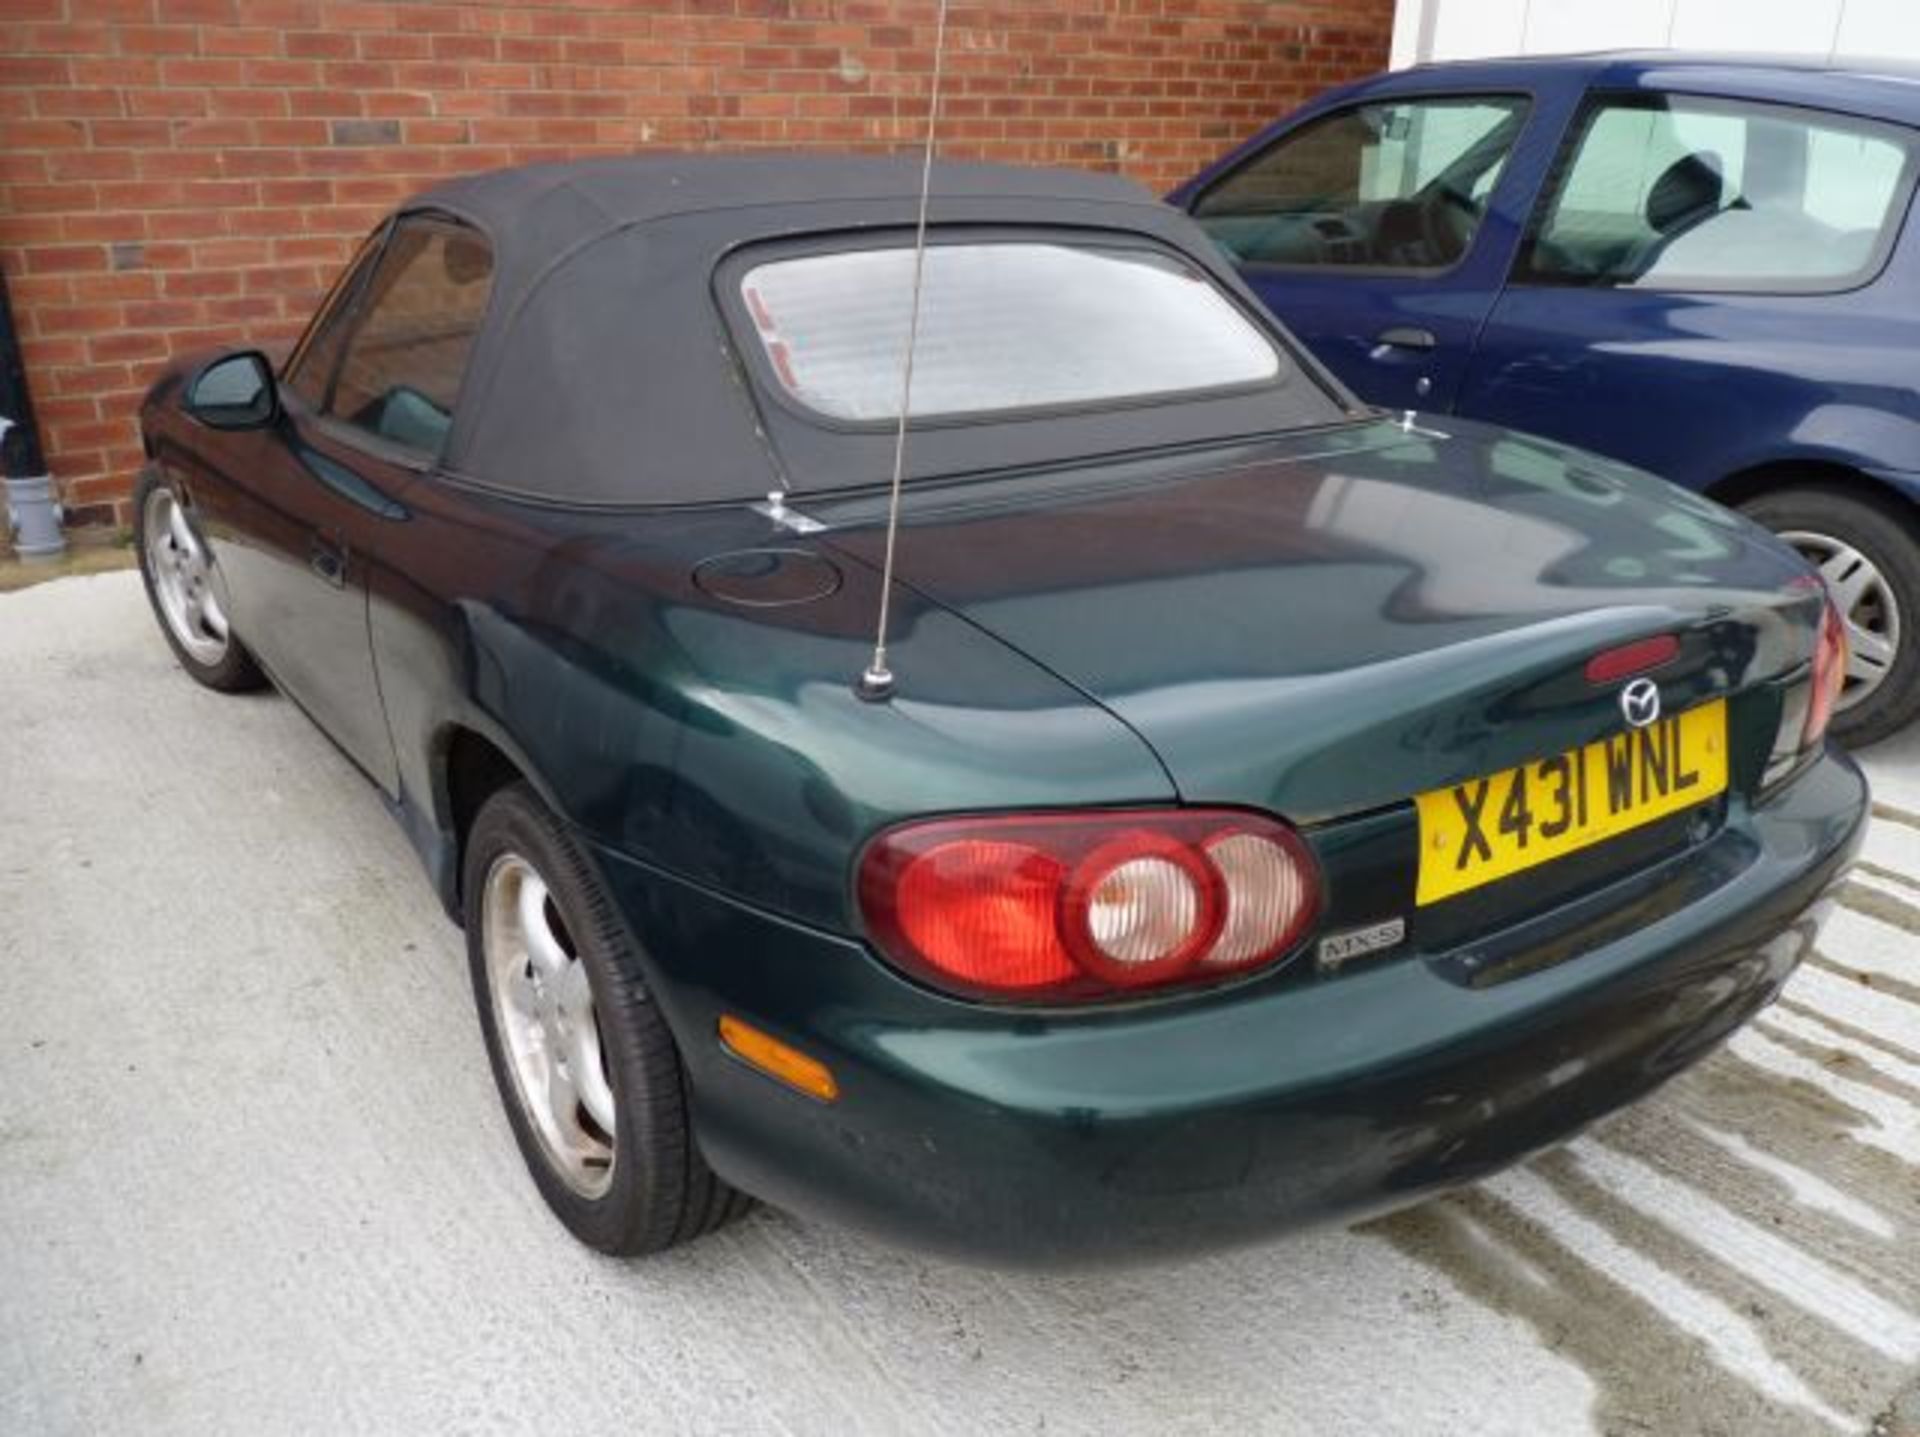 X PLATE MAZDA MX5 SOFT-TOP CONVERTIBLE; 1.8 PETROL; 107163 RECORDED MILES; REG X431 WNL; TAX - Image 2 of 7